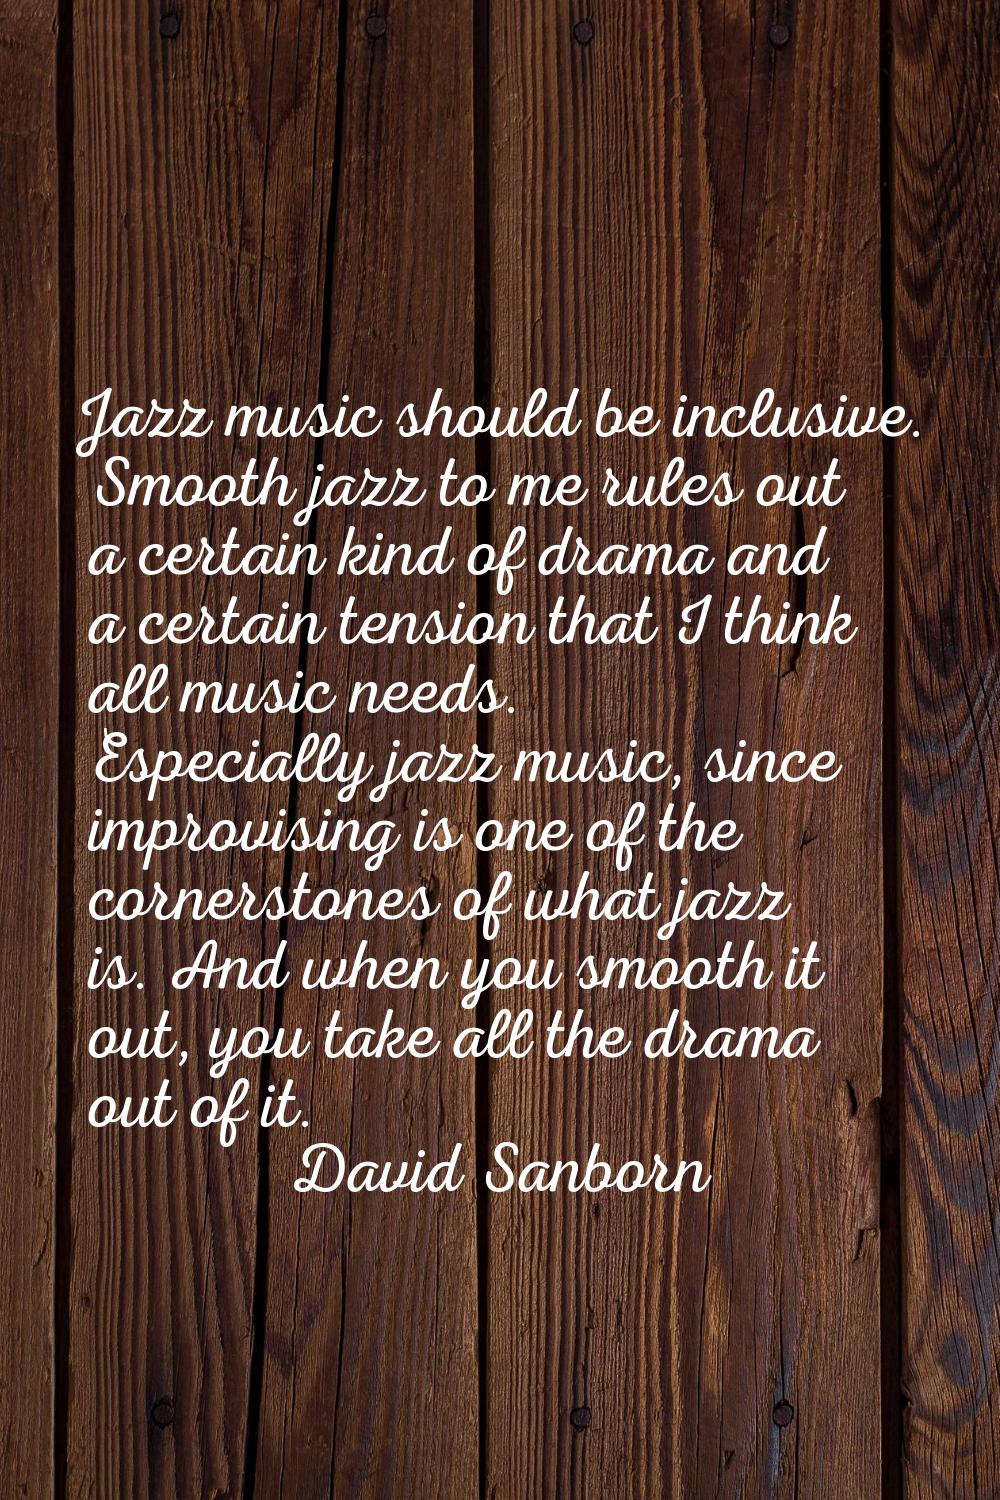 Jazz music should be inclusive. Smooth jazz to me rules out a certain kind of drama and a certain t